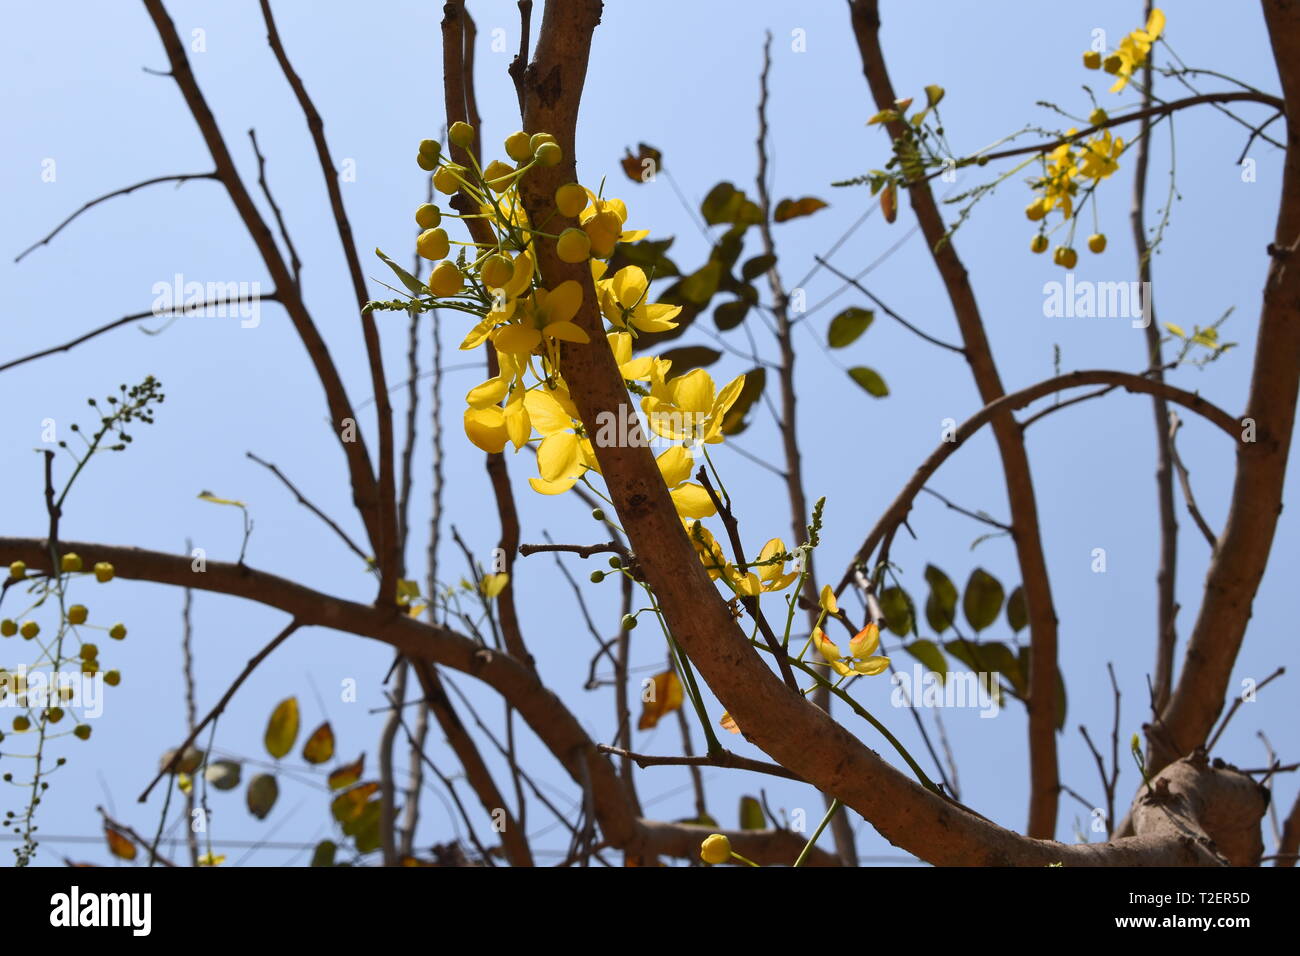 Cassia fistula tree starting to bloom in spring. Stock Photo